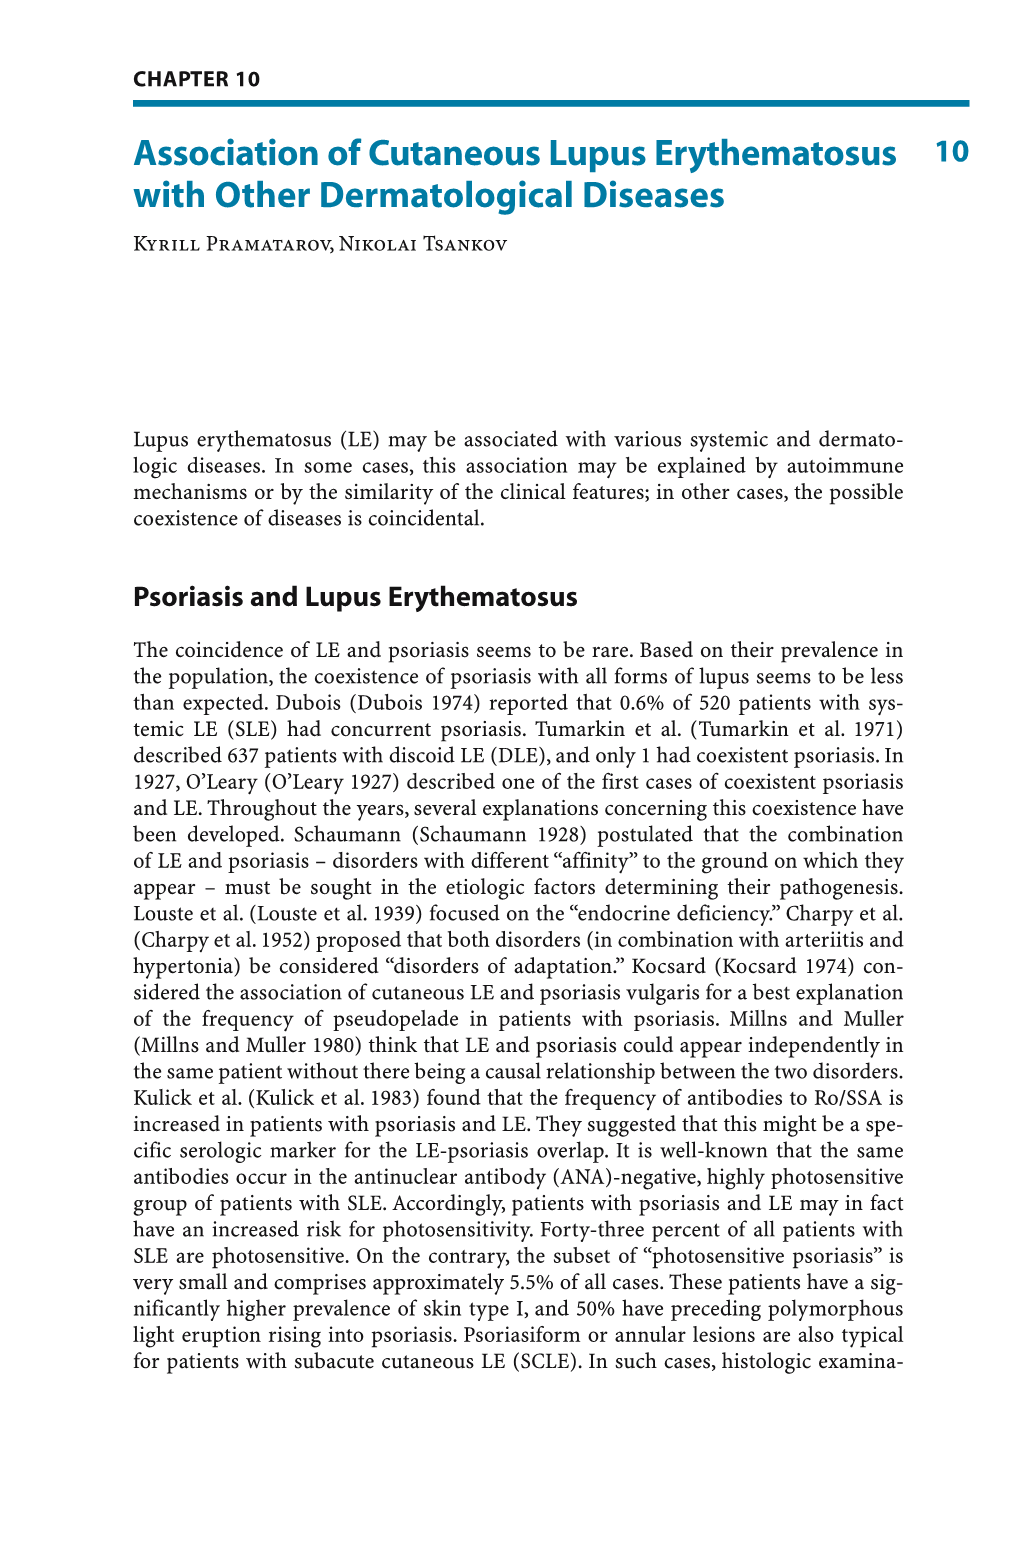 Association of Cutaneous Lupus Erythematosus with Other